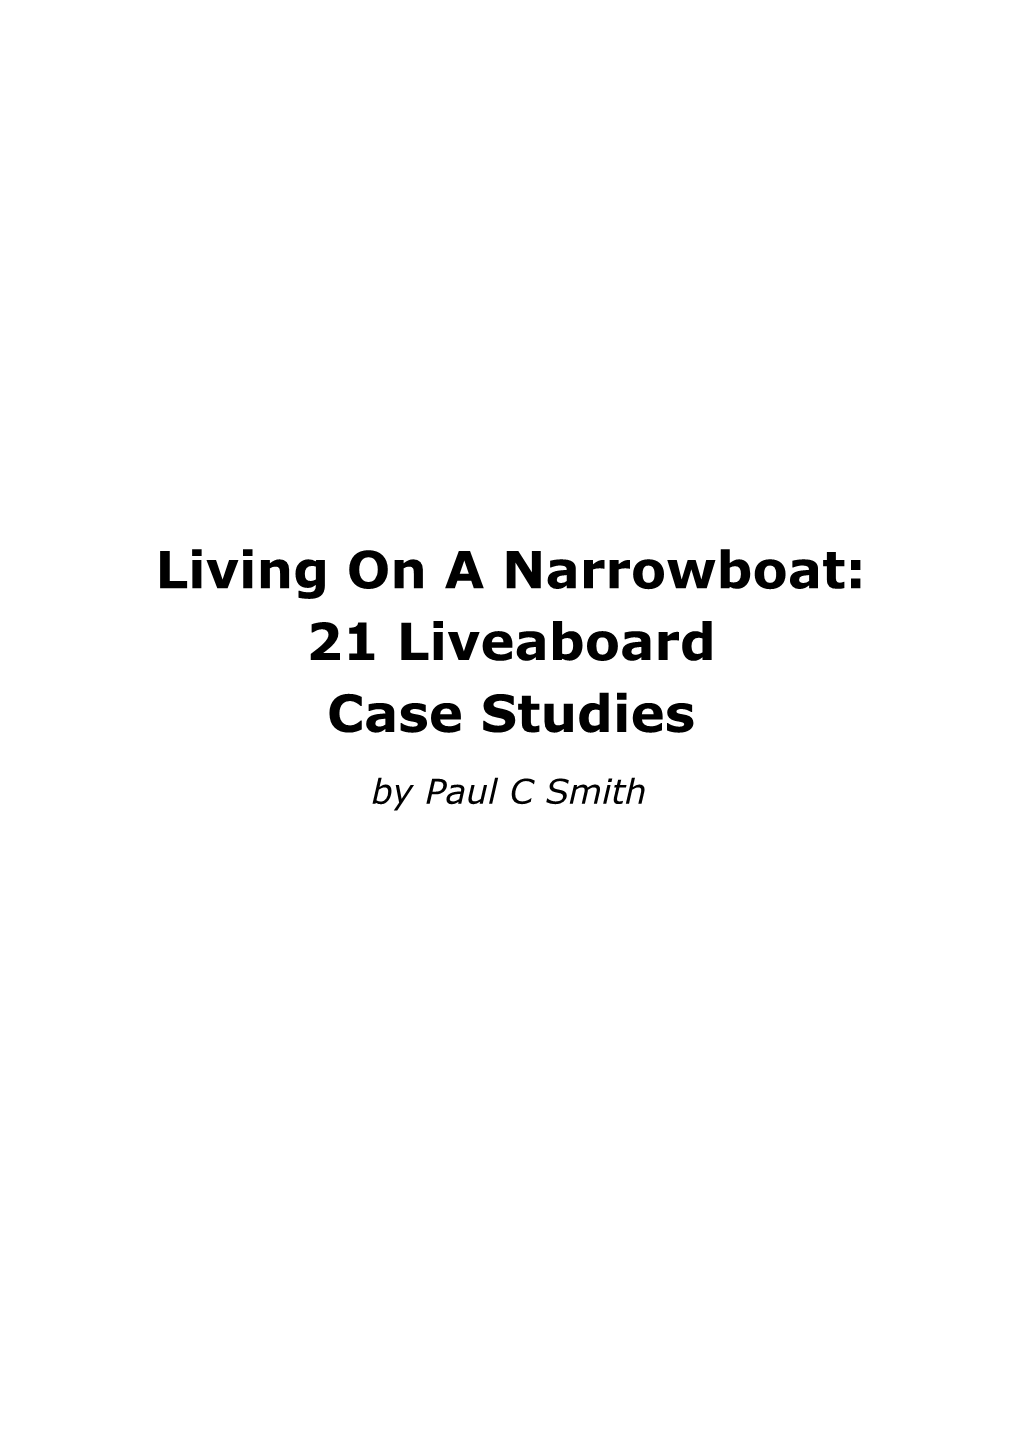 21 Liveaboard Case Studies by Paul C Smith All Rights Reserved